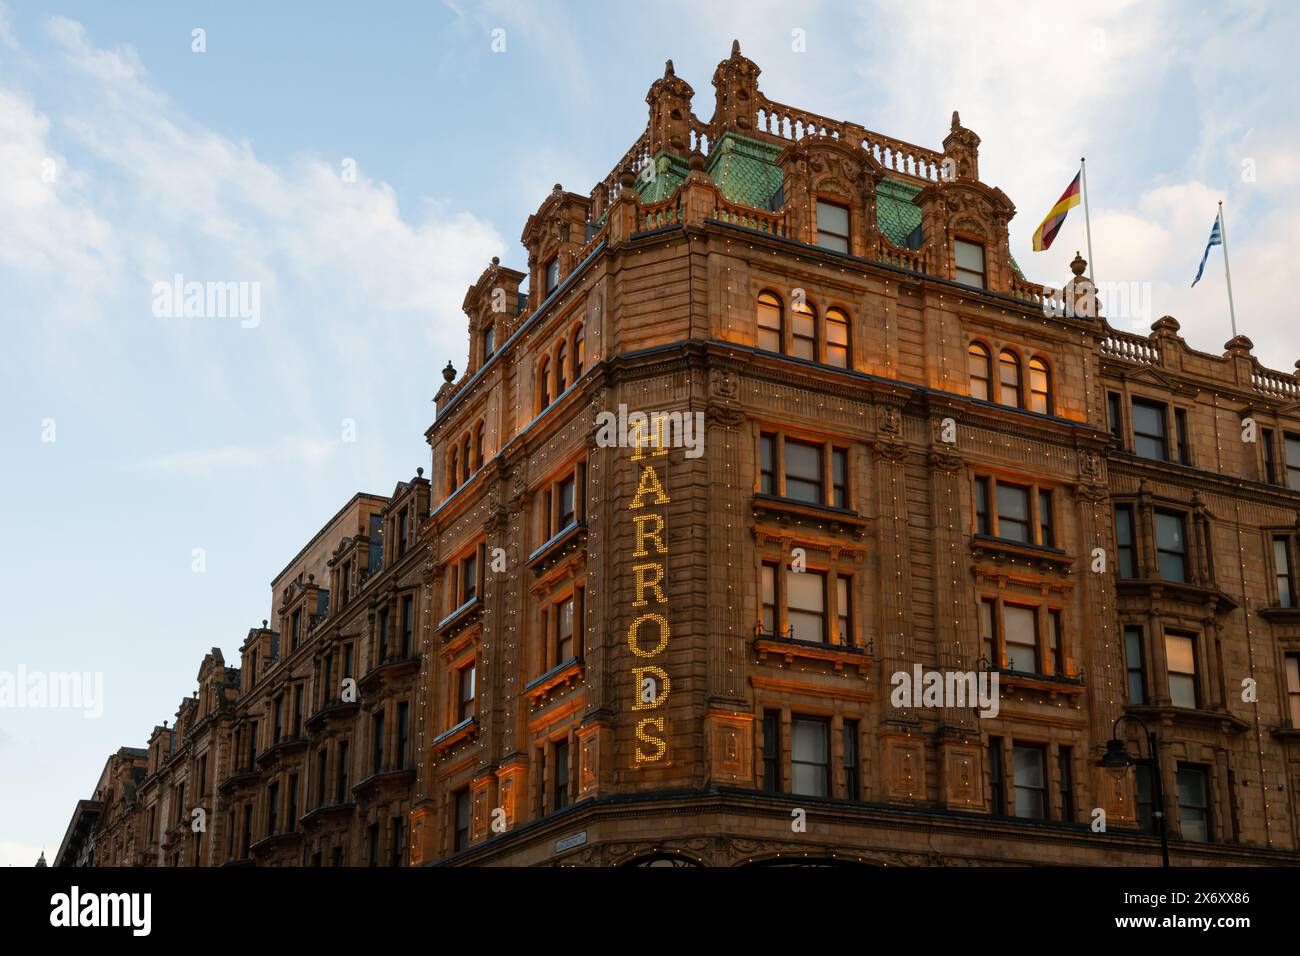 London, UK - March 22, 2024; Detail of Harrods department store sign illuminated on facade  in evening light Stock Photo